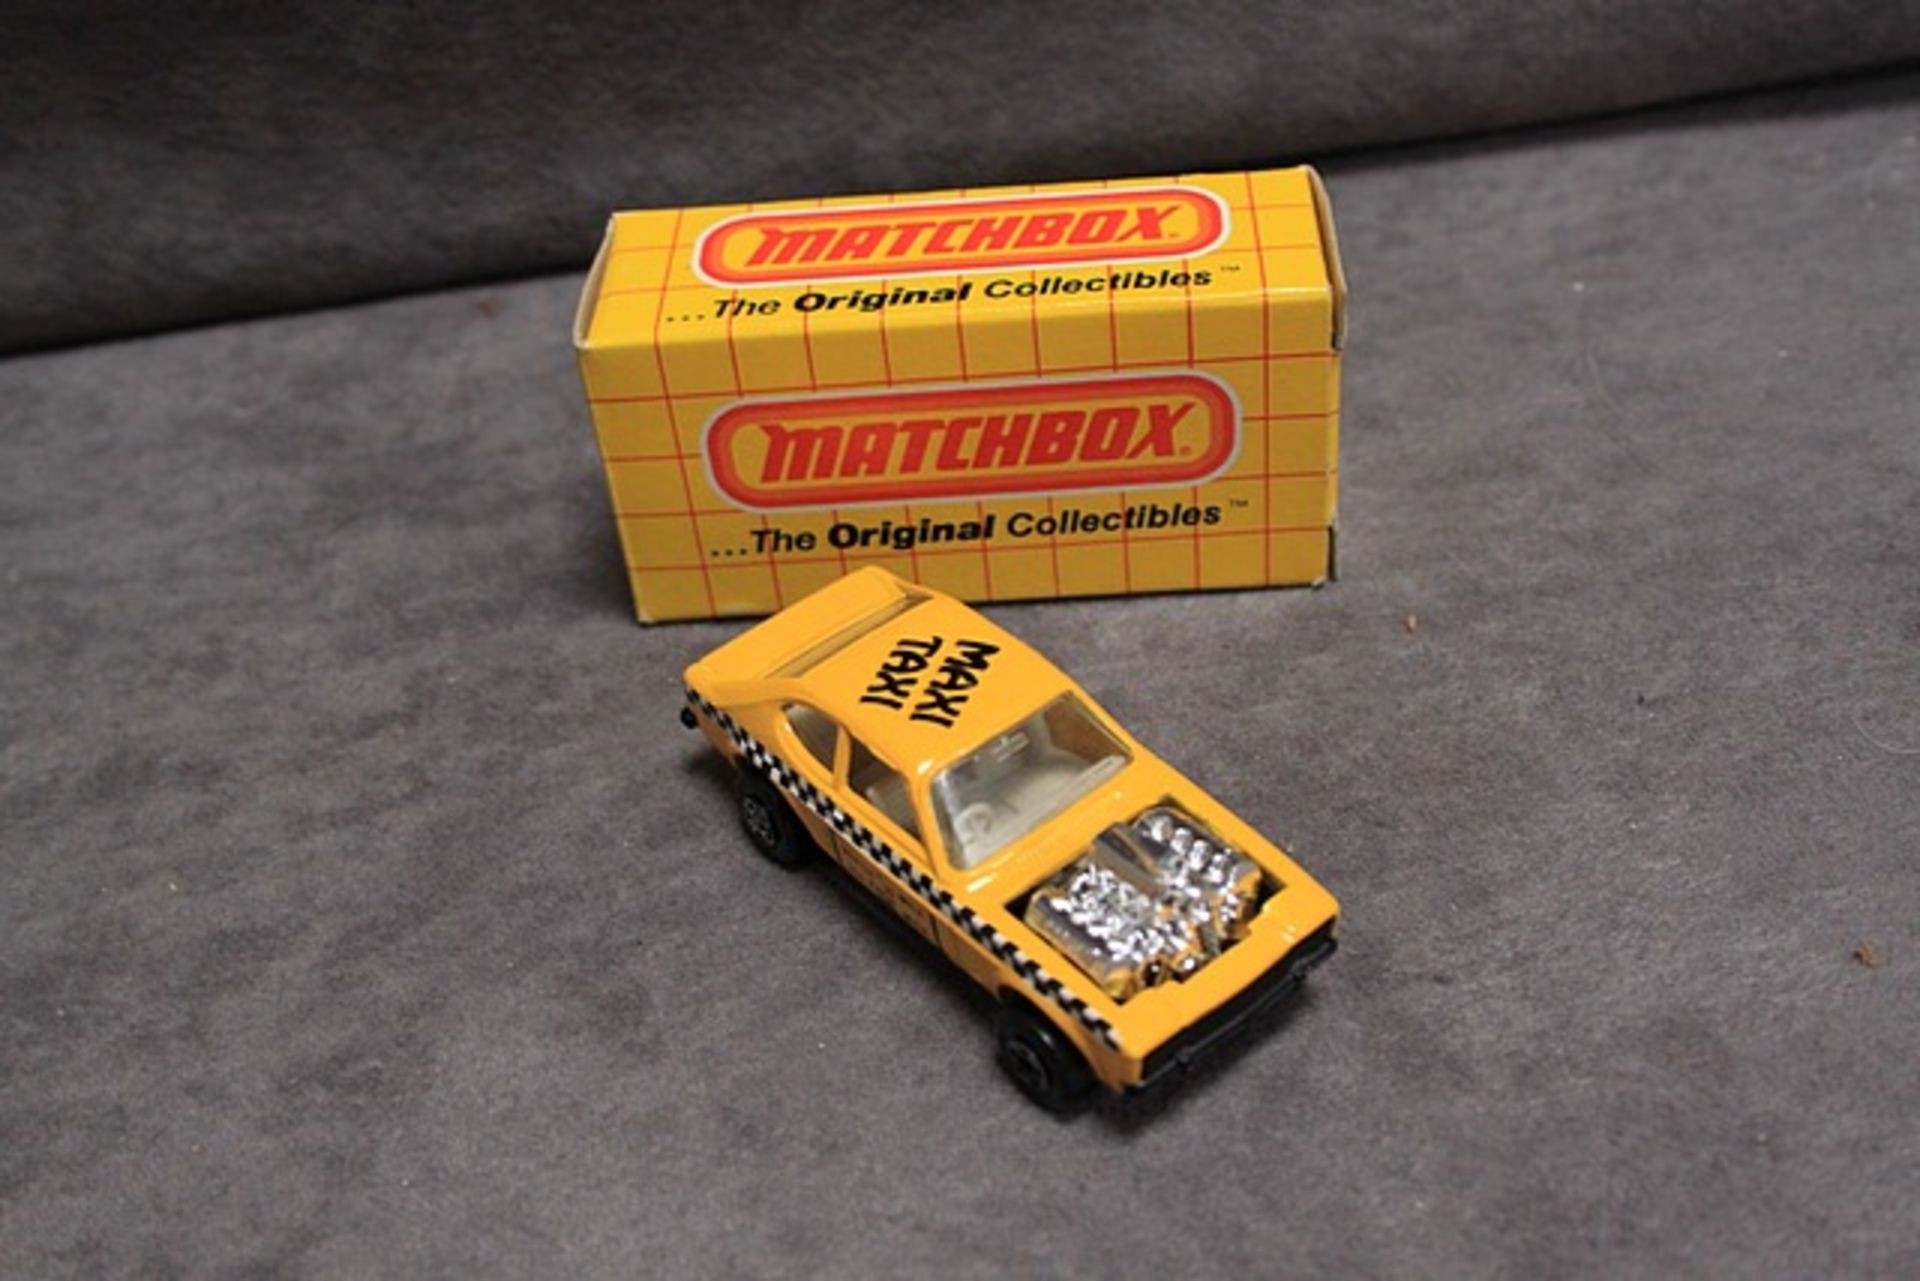 Mint Matchbox Series diecast #72 Maxi taxi in bright yellow excellent box (made in Hon Kong) - Image 3 of 3